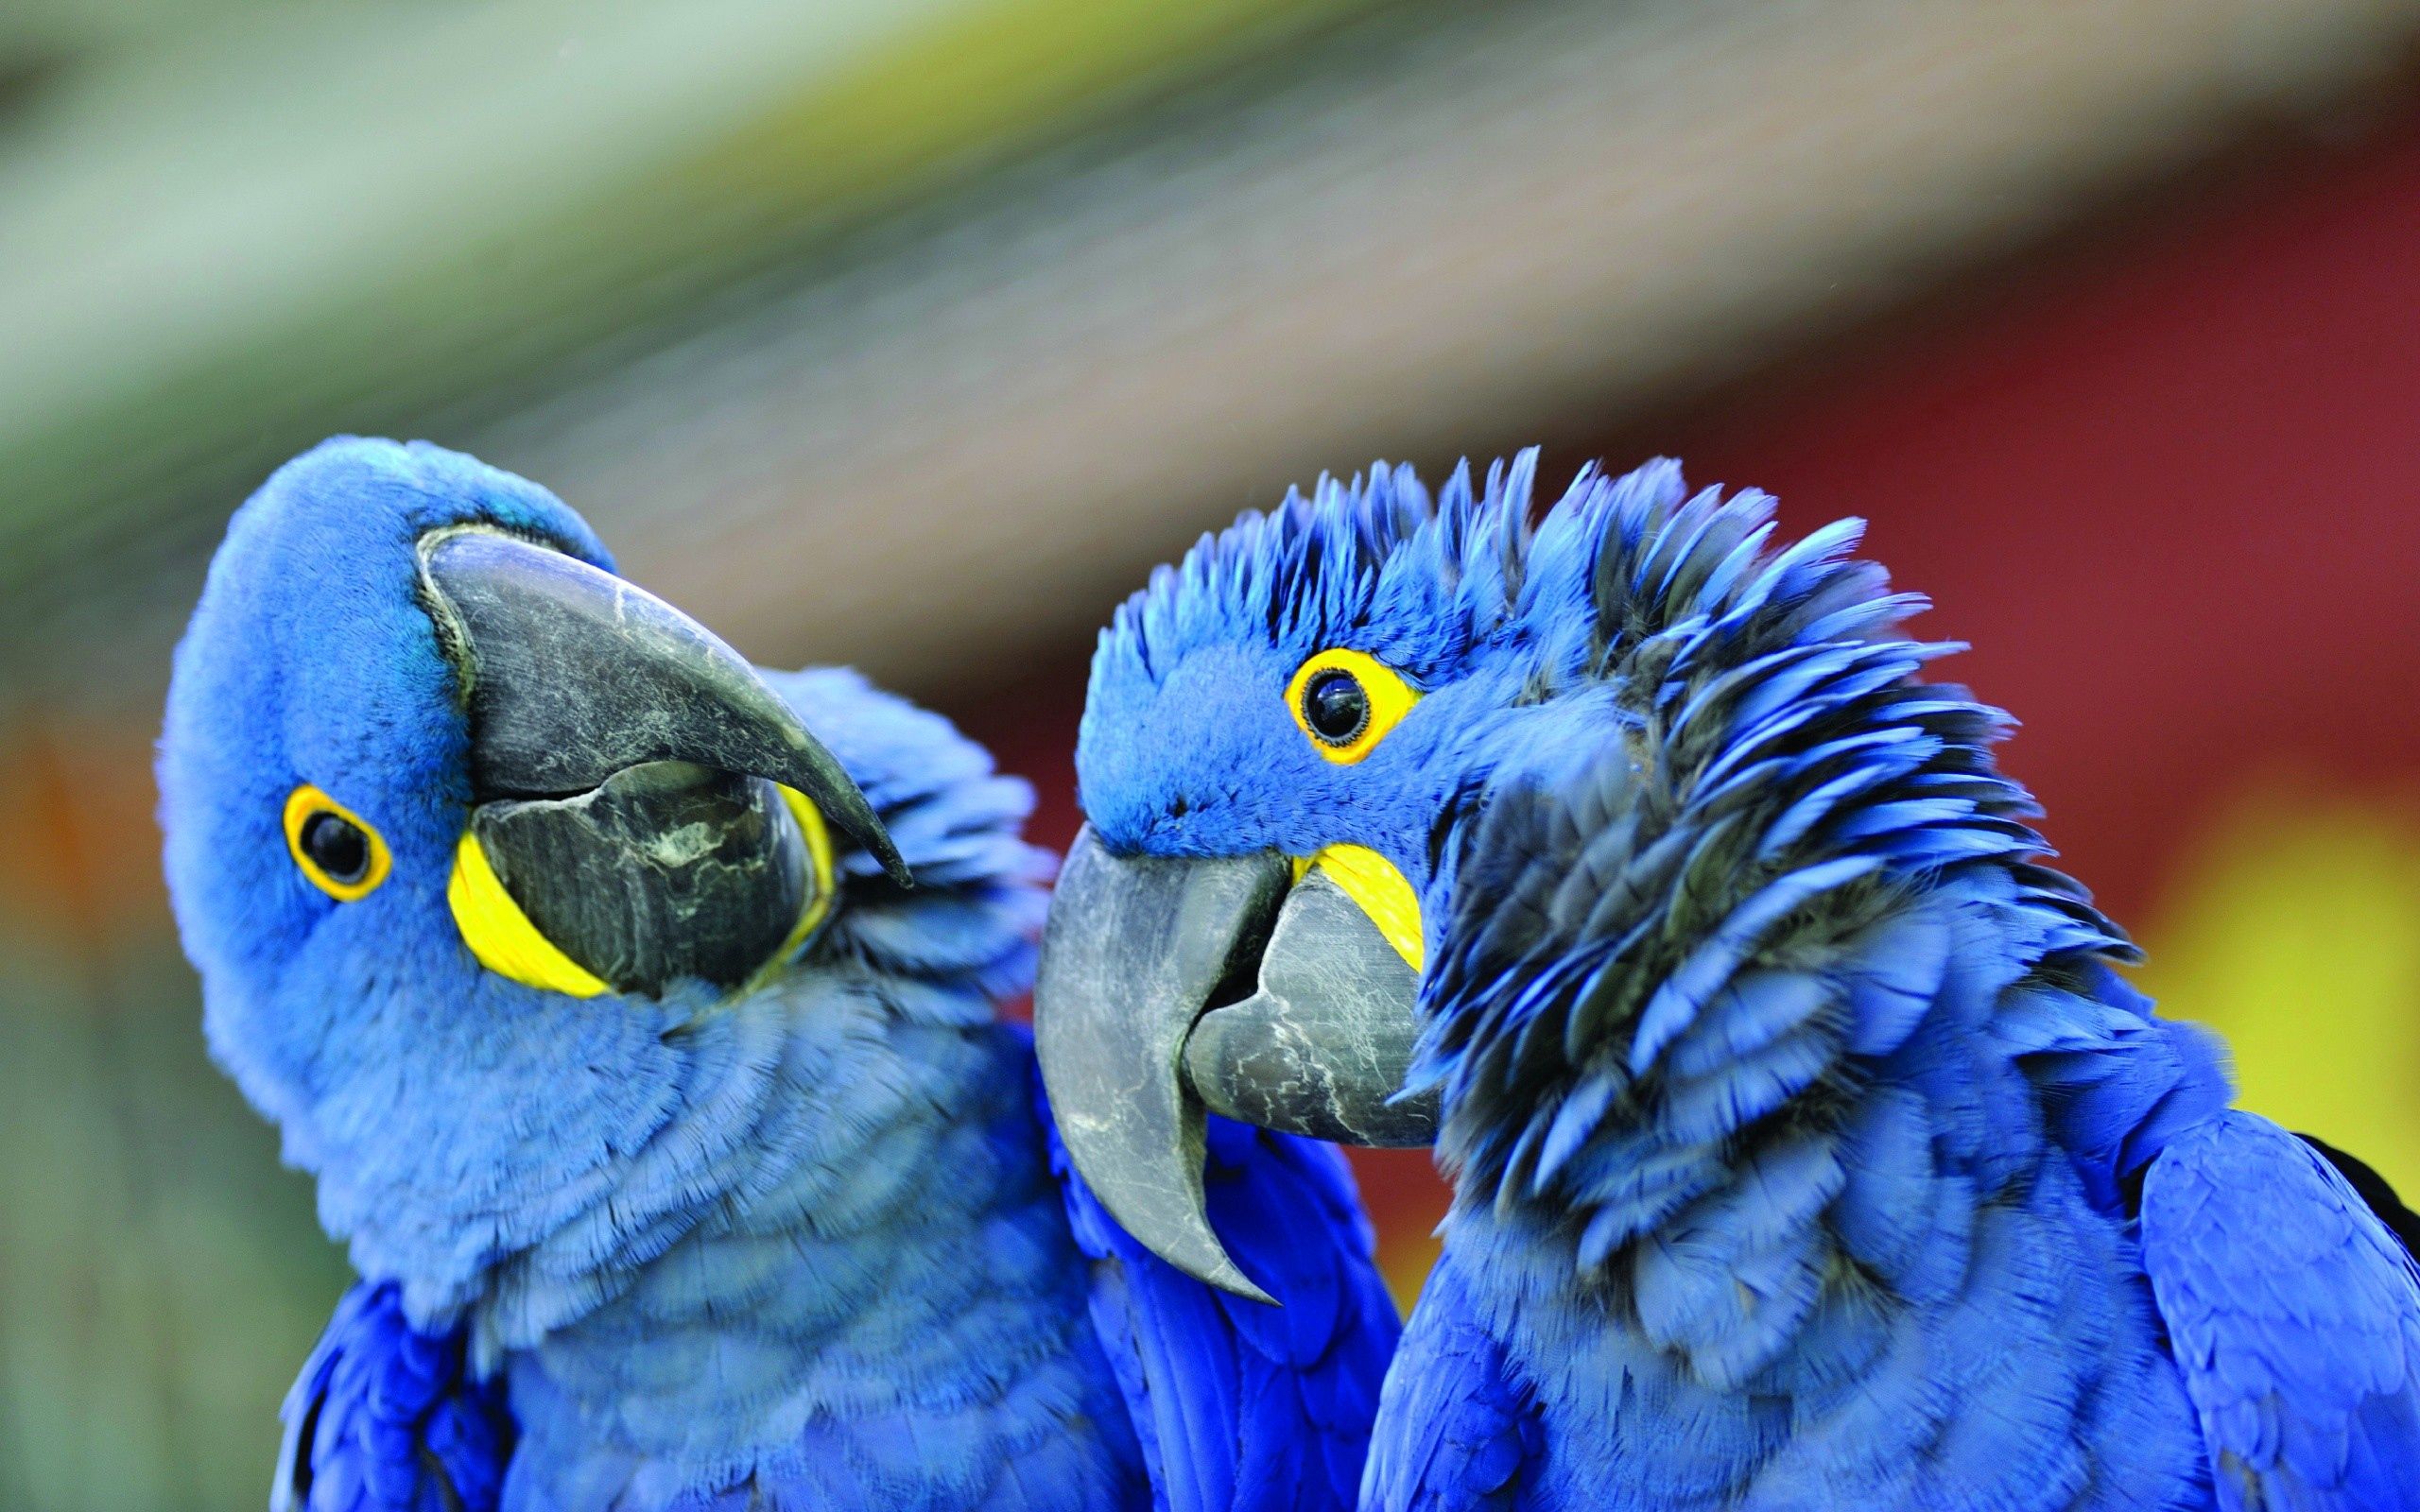 Two cheerful parrots in blue